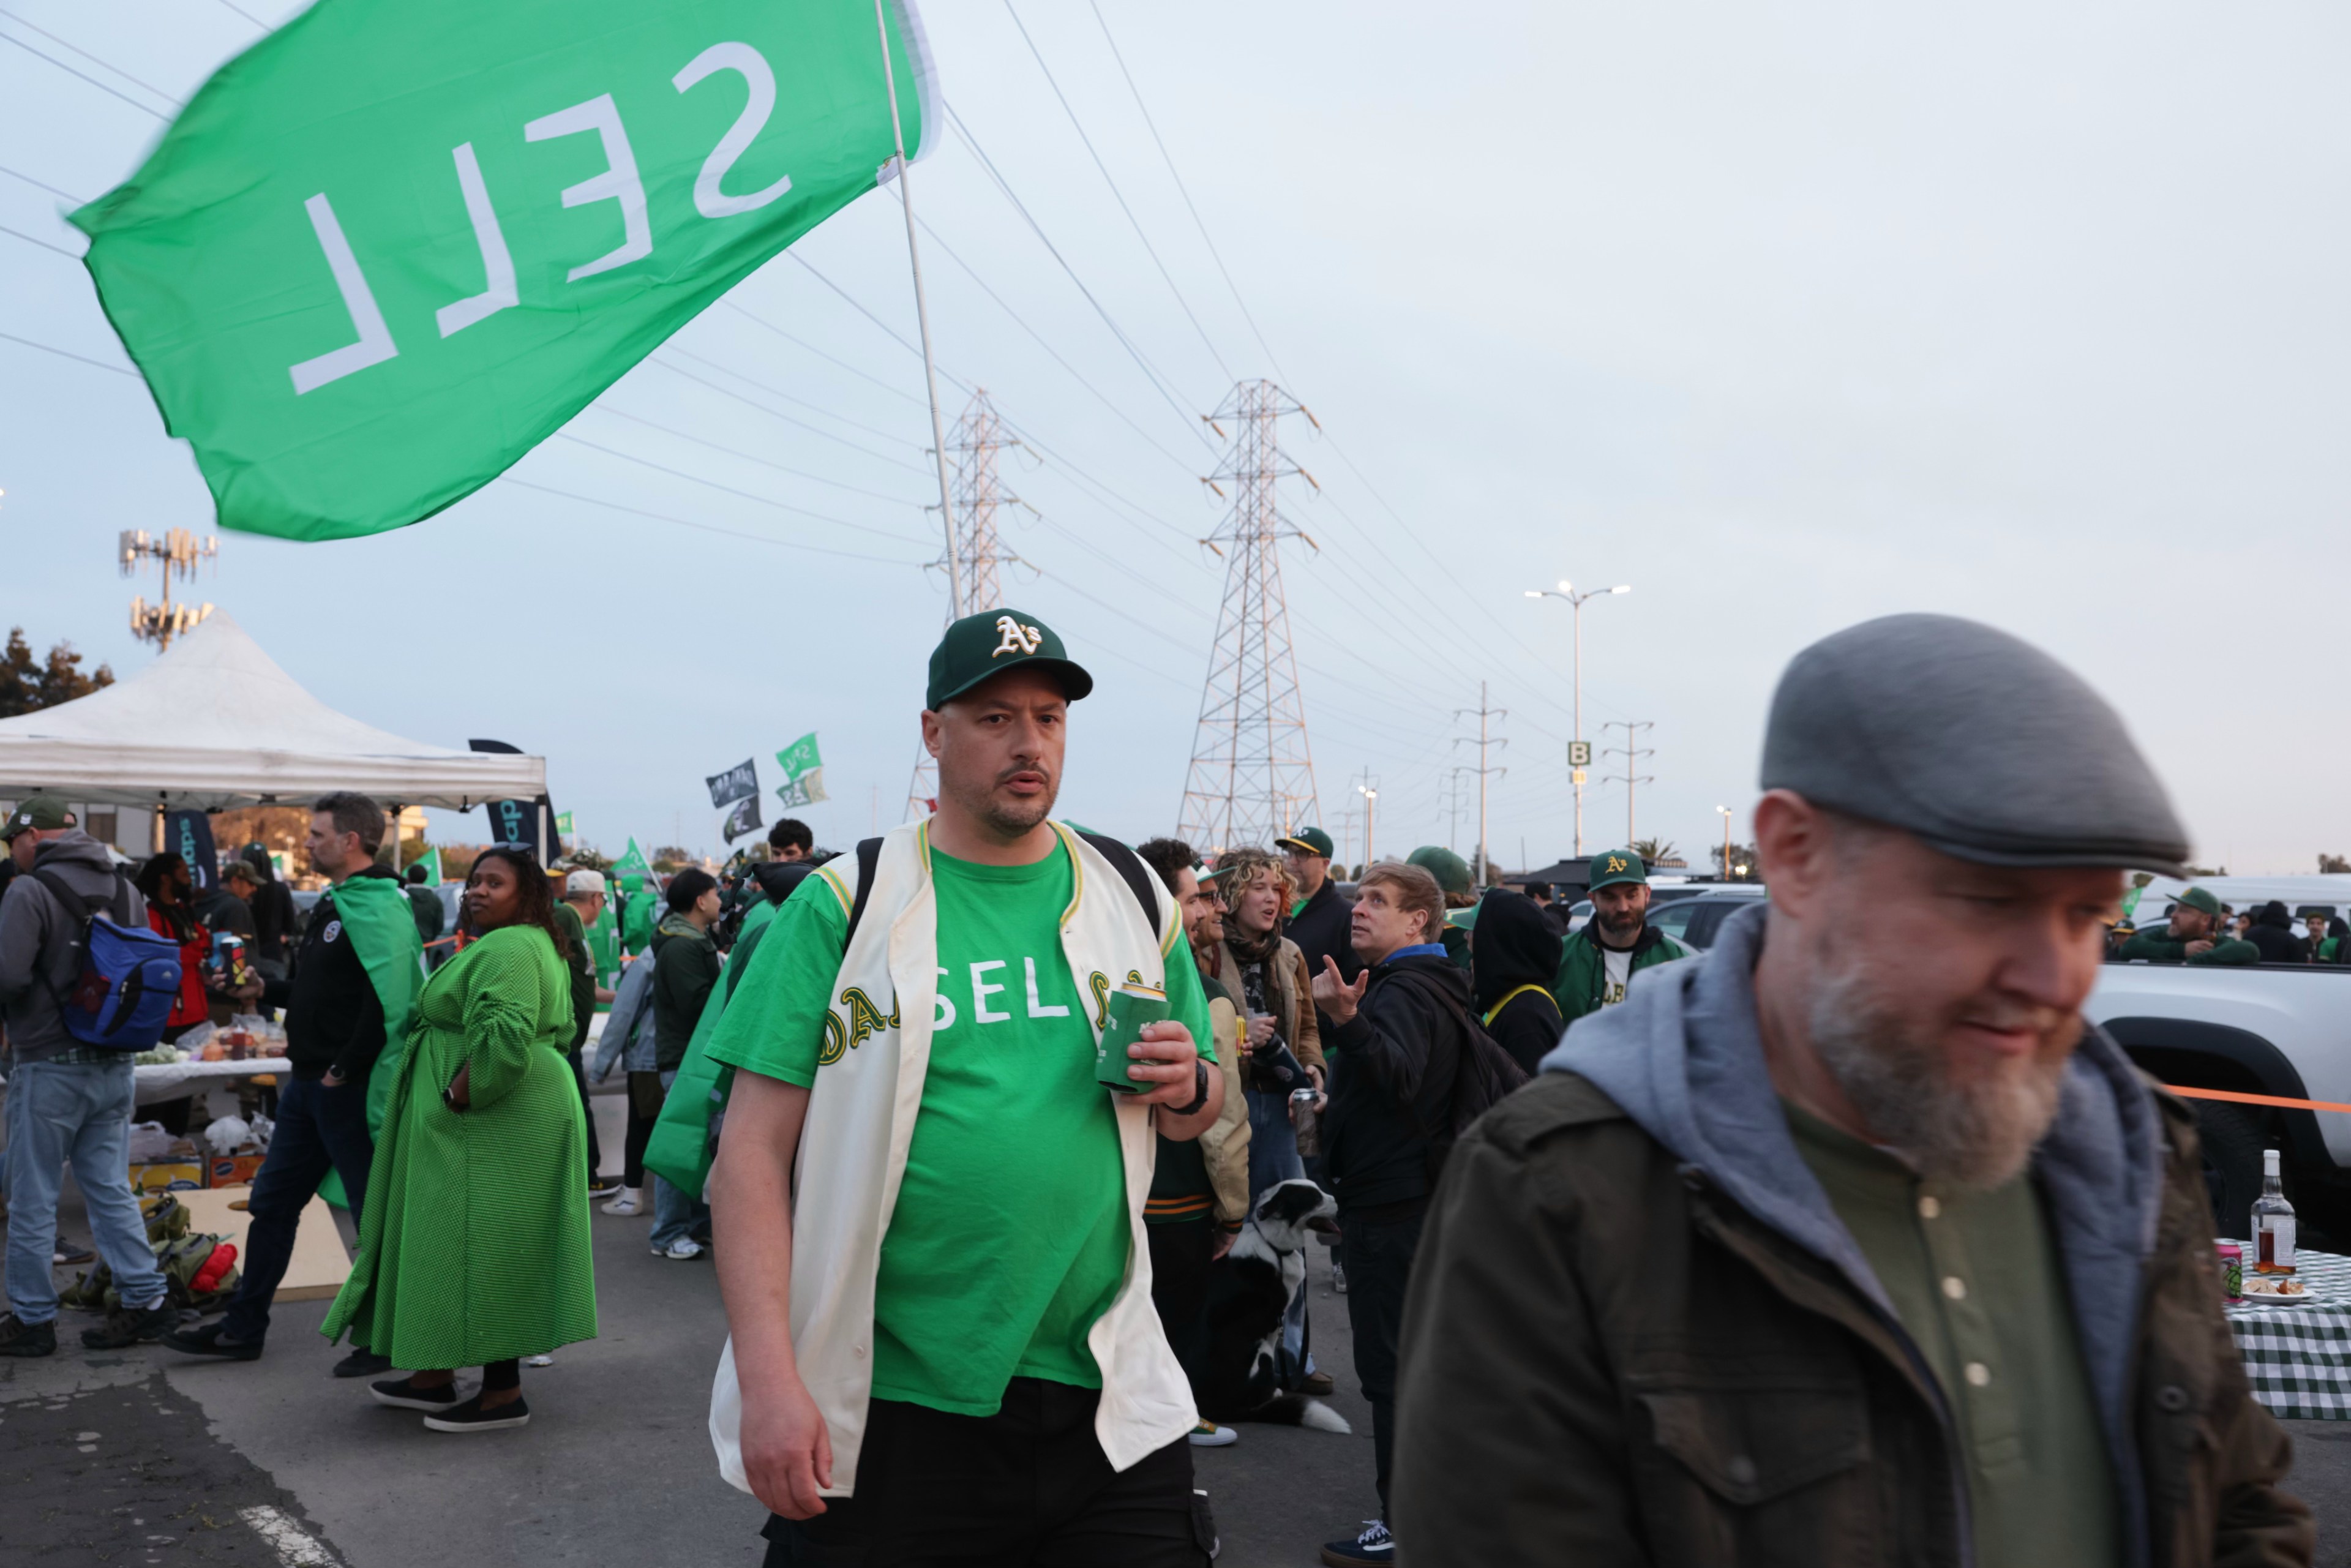 A crowded outdoor gathering with people in green attire, some with Oakland A's logos, and a SELLS flag.